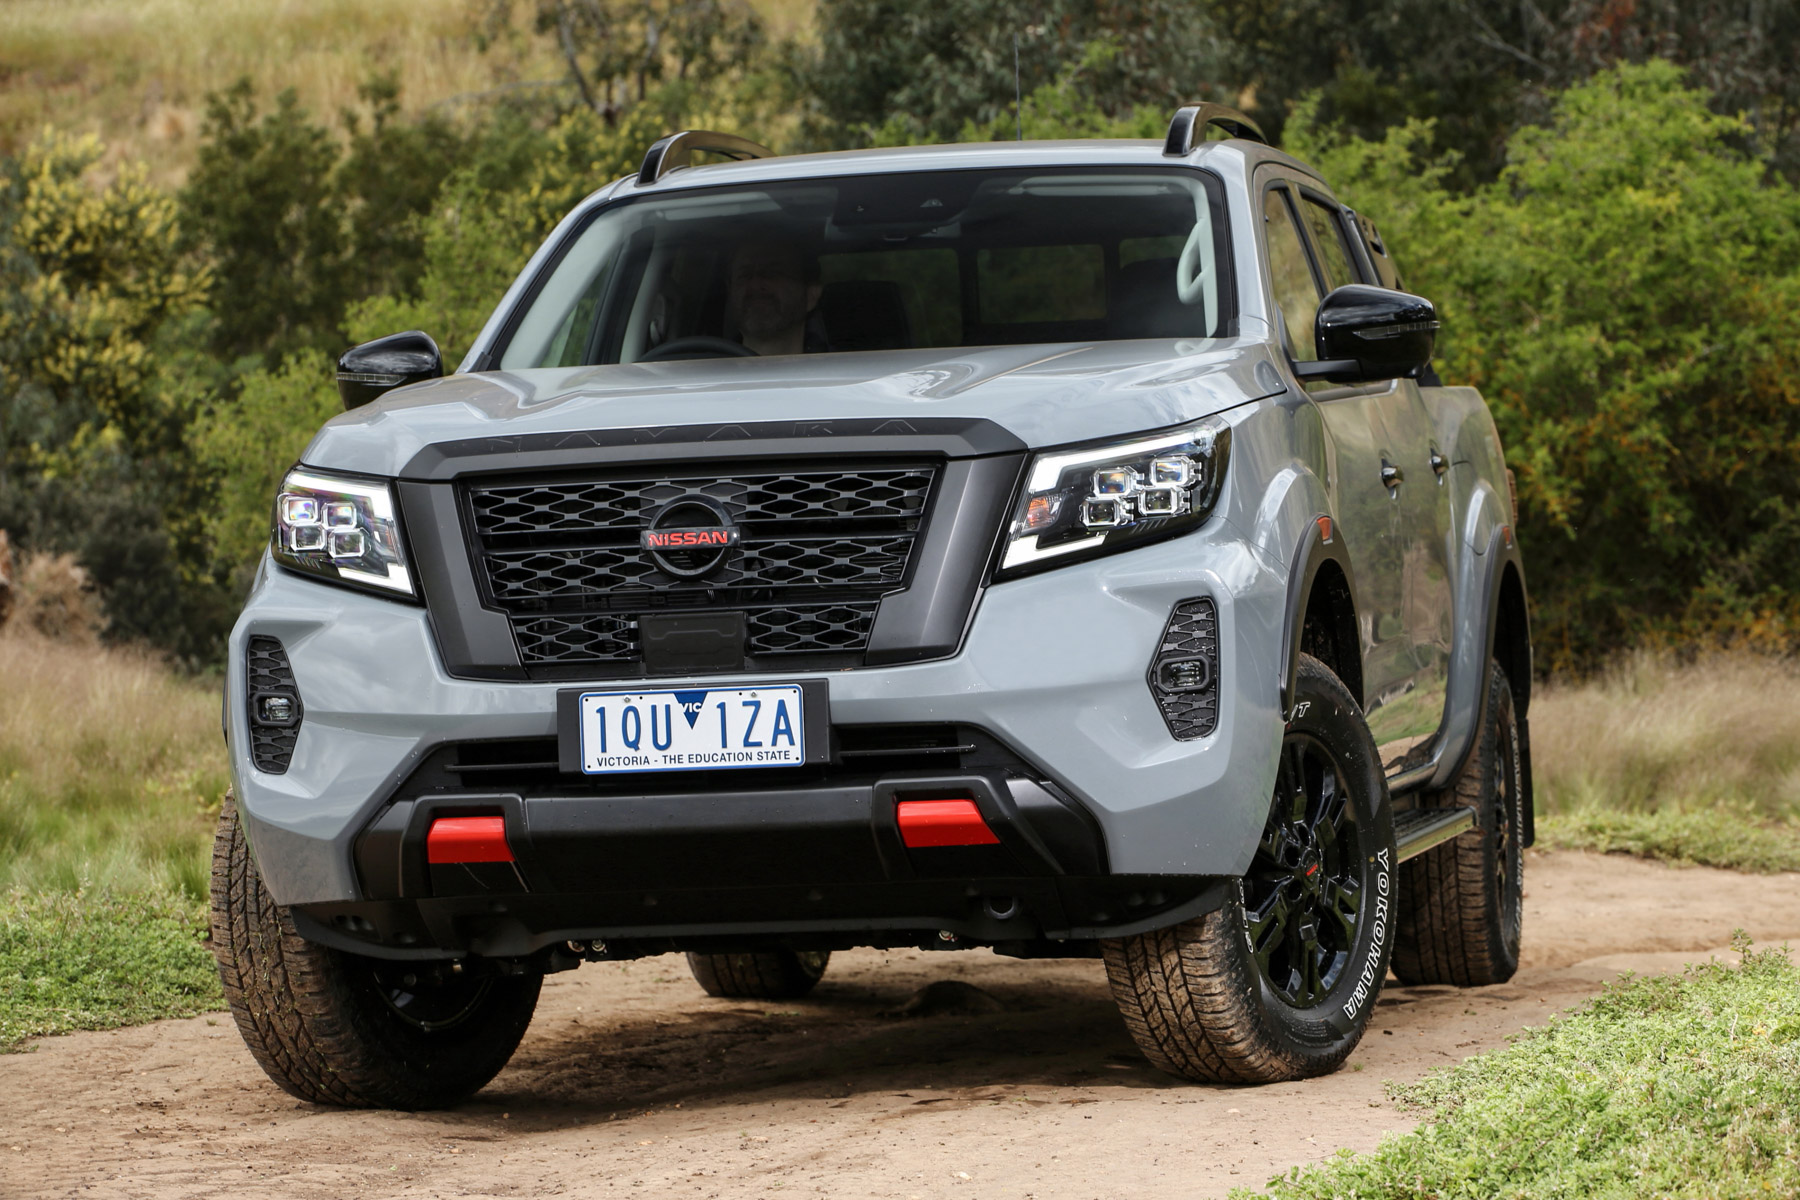 New Nissan Navara 2021 A Tough Pickup Truck Adds A Pro4x Model Images